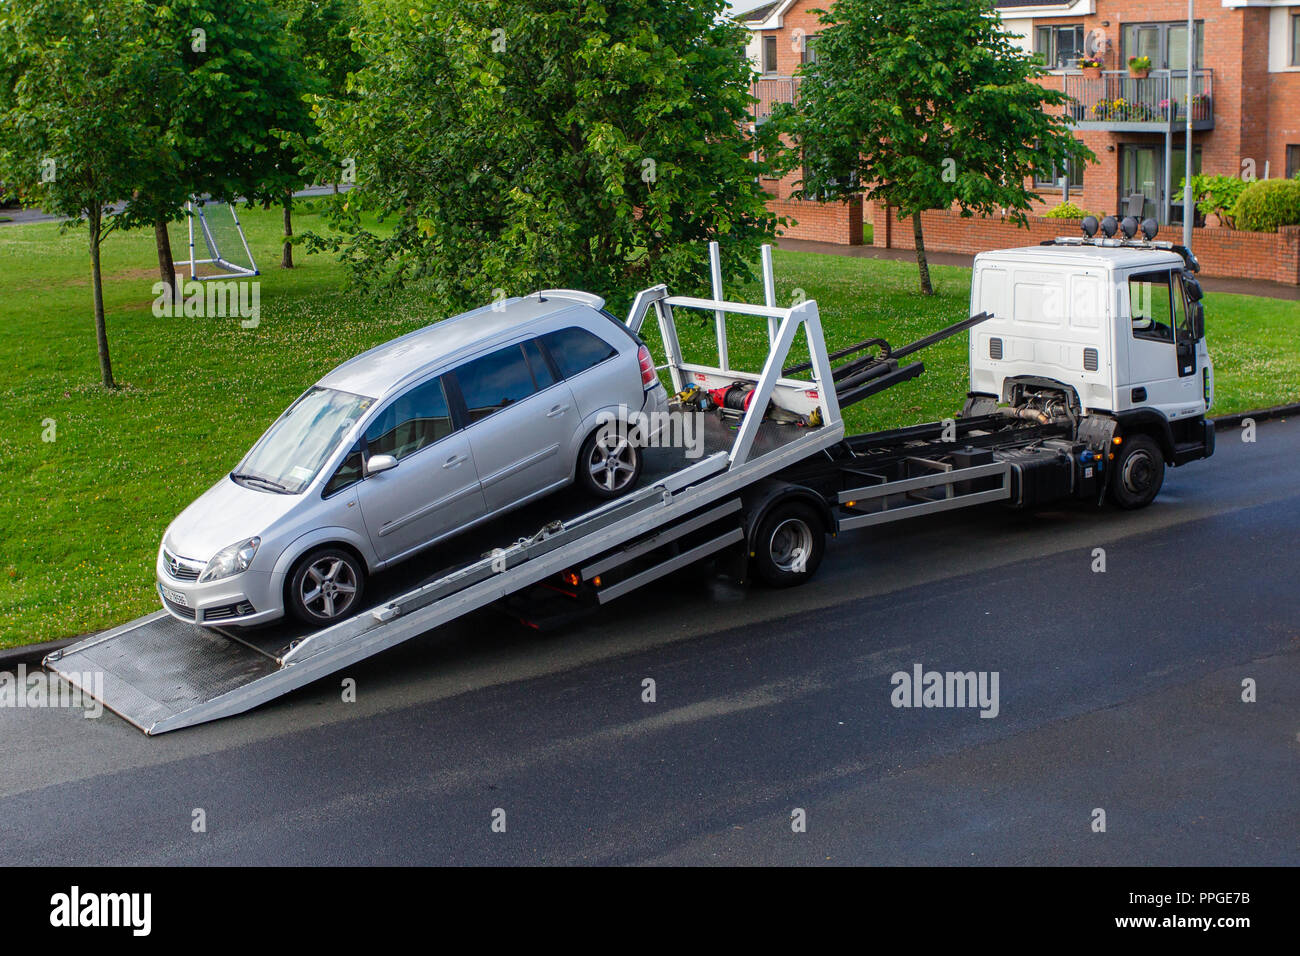 End-of-life car being loaded onto tow-away vehicle truck. Celbridge, Ireland Stock Photo